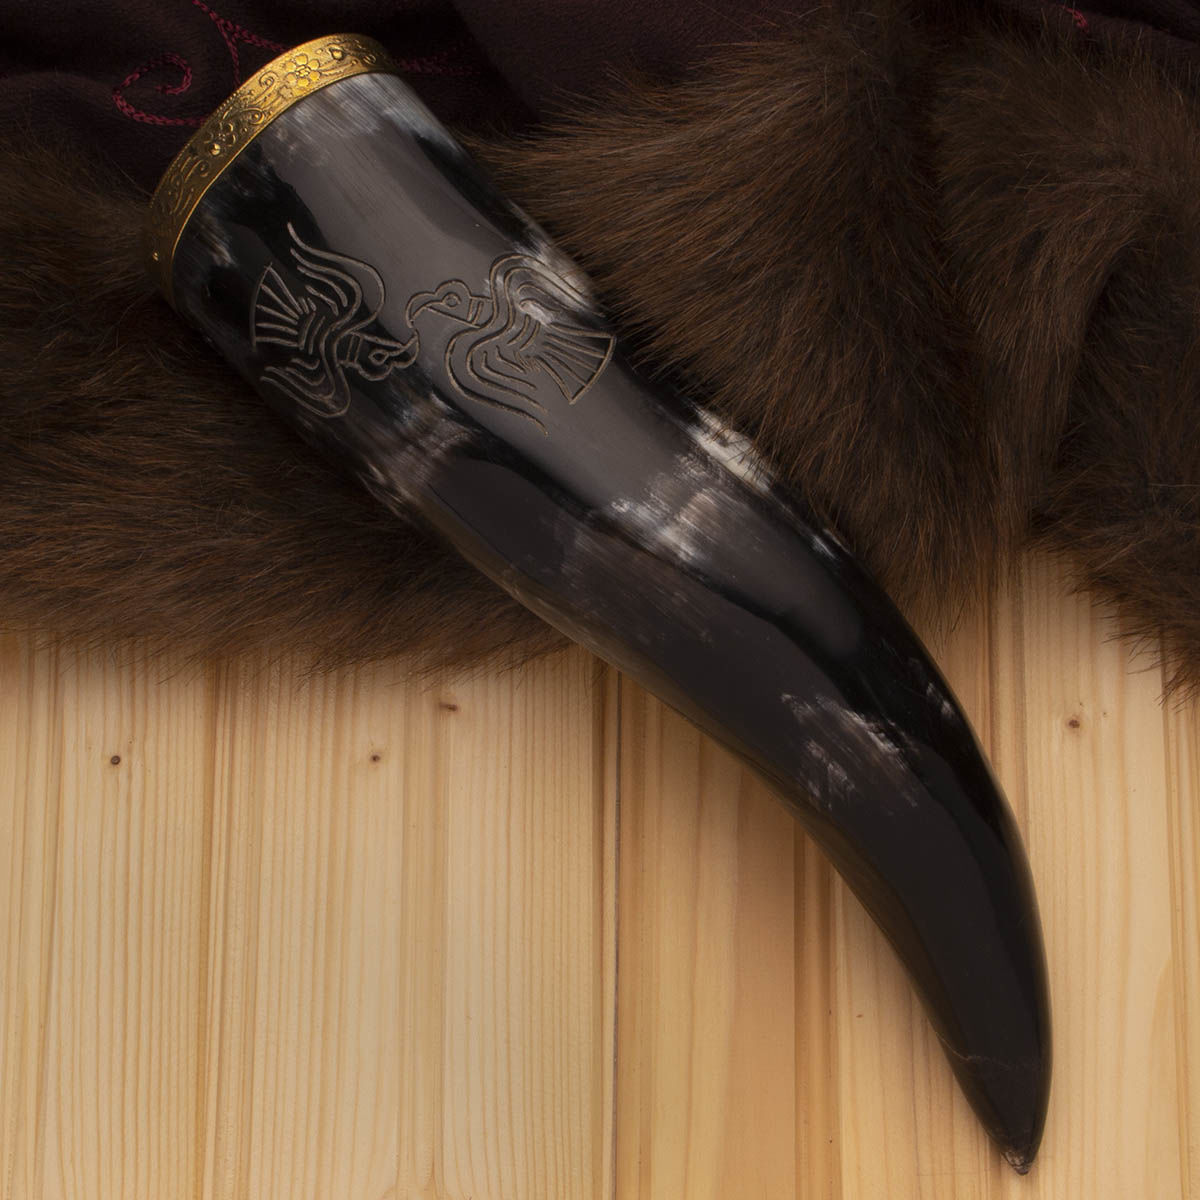 Viking Drinking Horn with hand-engraved ravens is fully functional but slightly de-laminated at the mouth